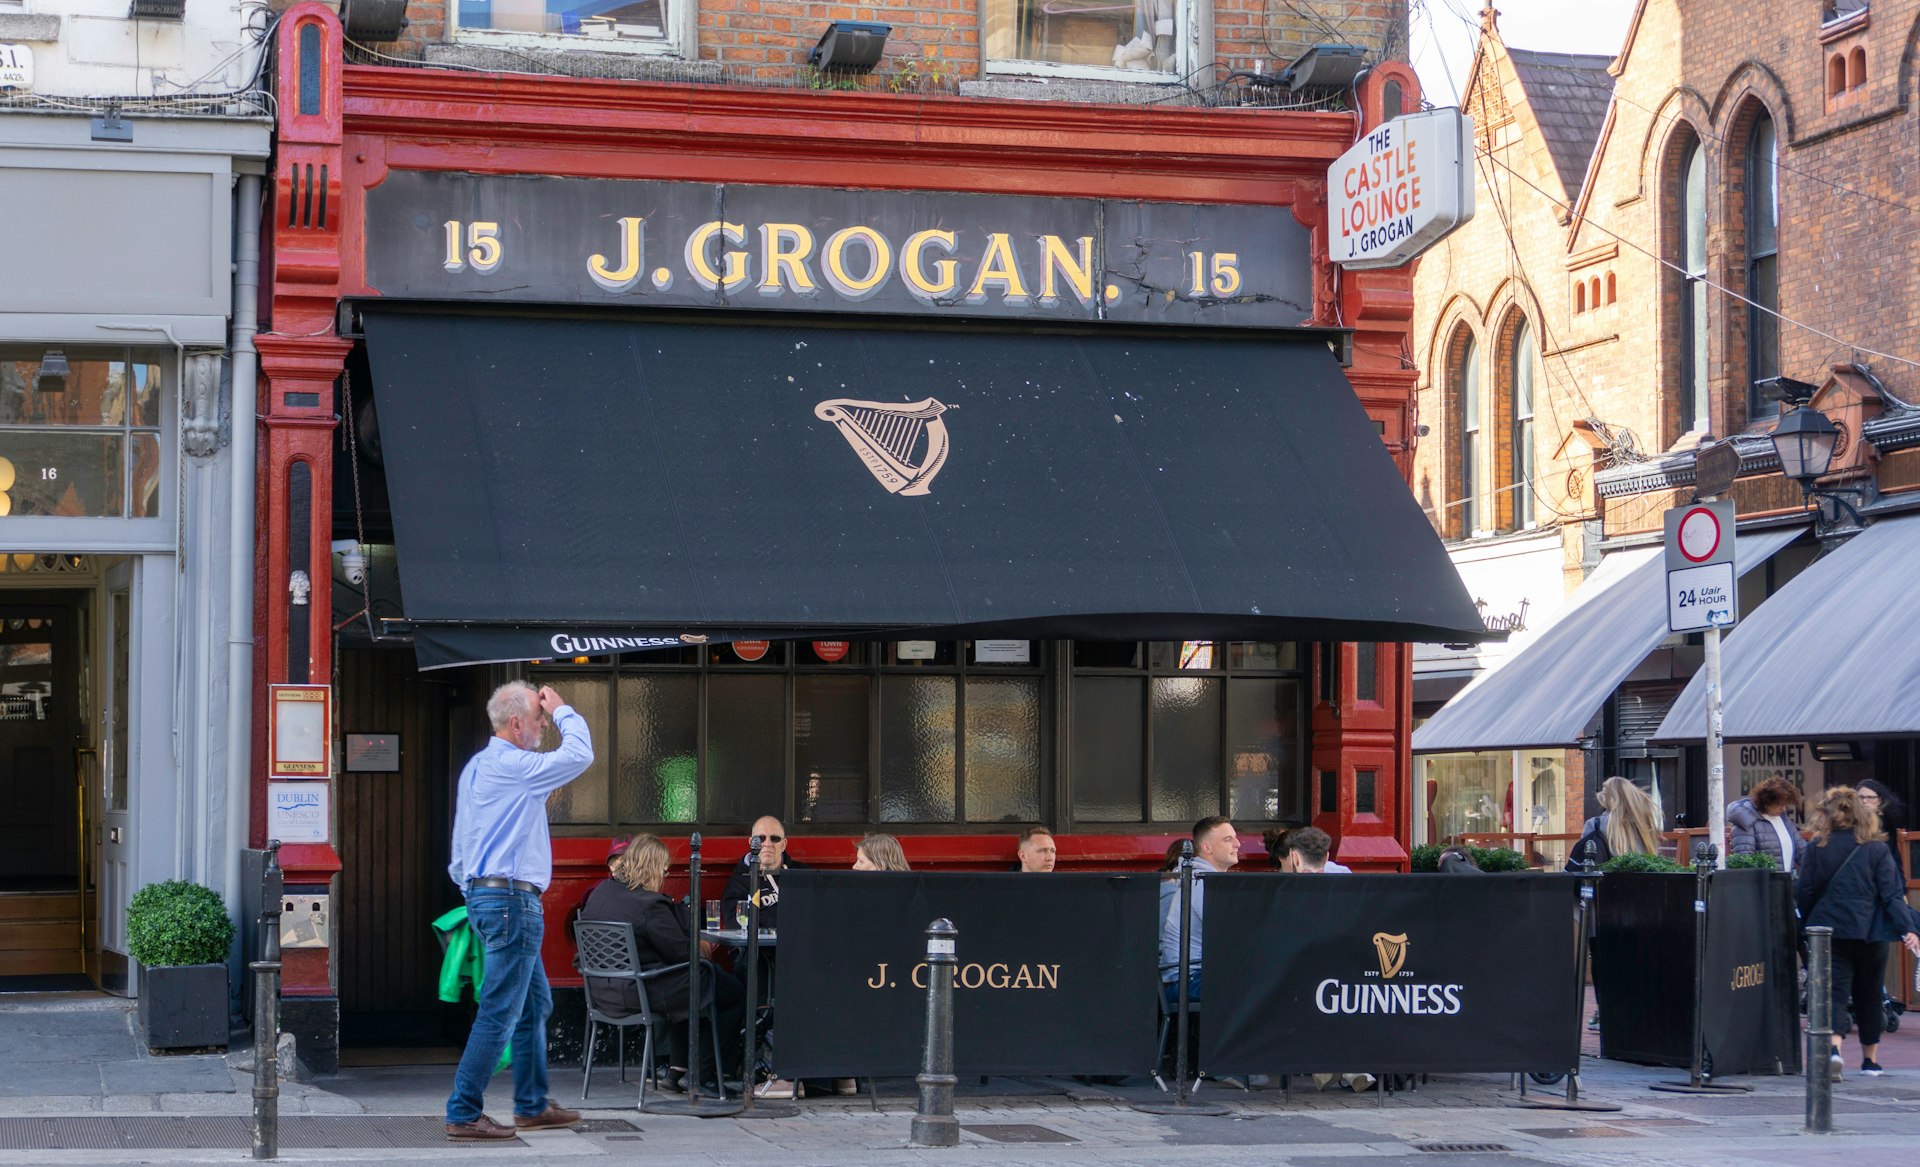 Exterior of Grogan’s Castle Lounge on Sth William Street, which was once a well-known haunt of a literary and artistic set.